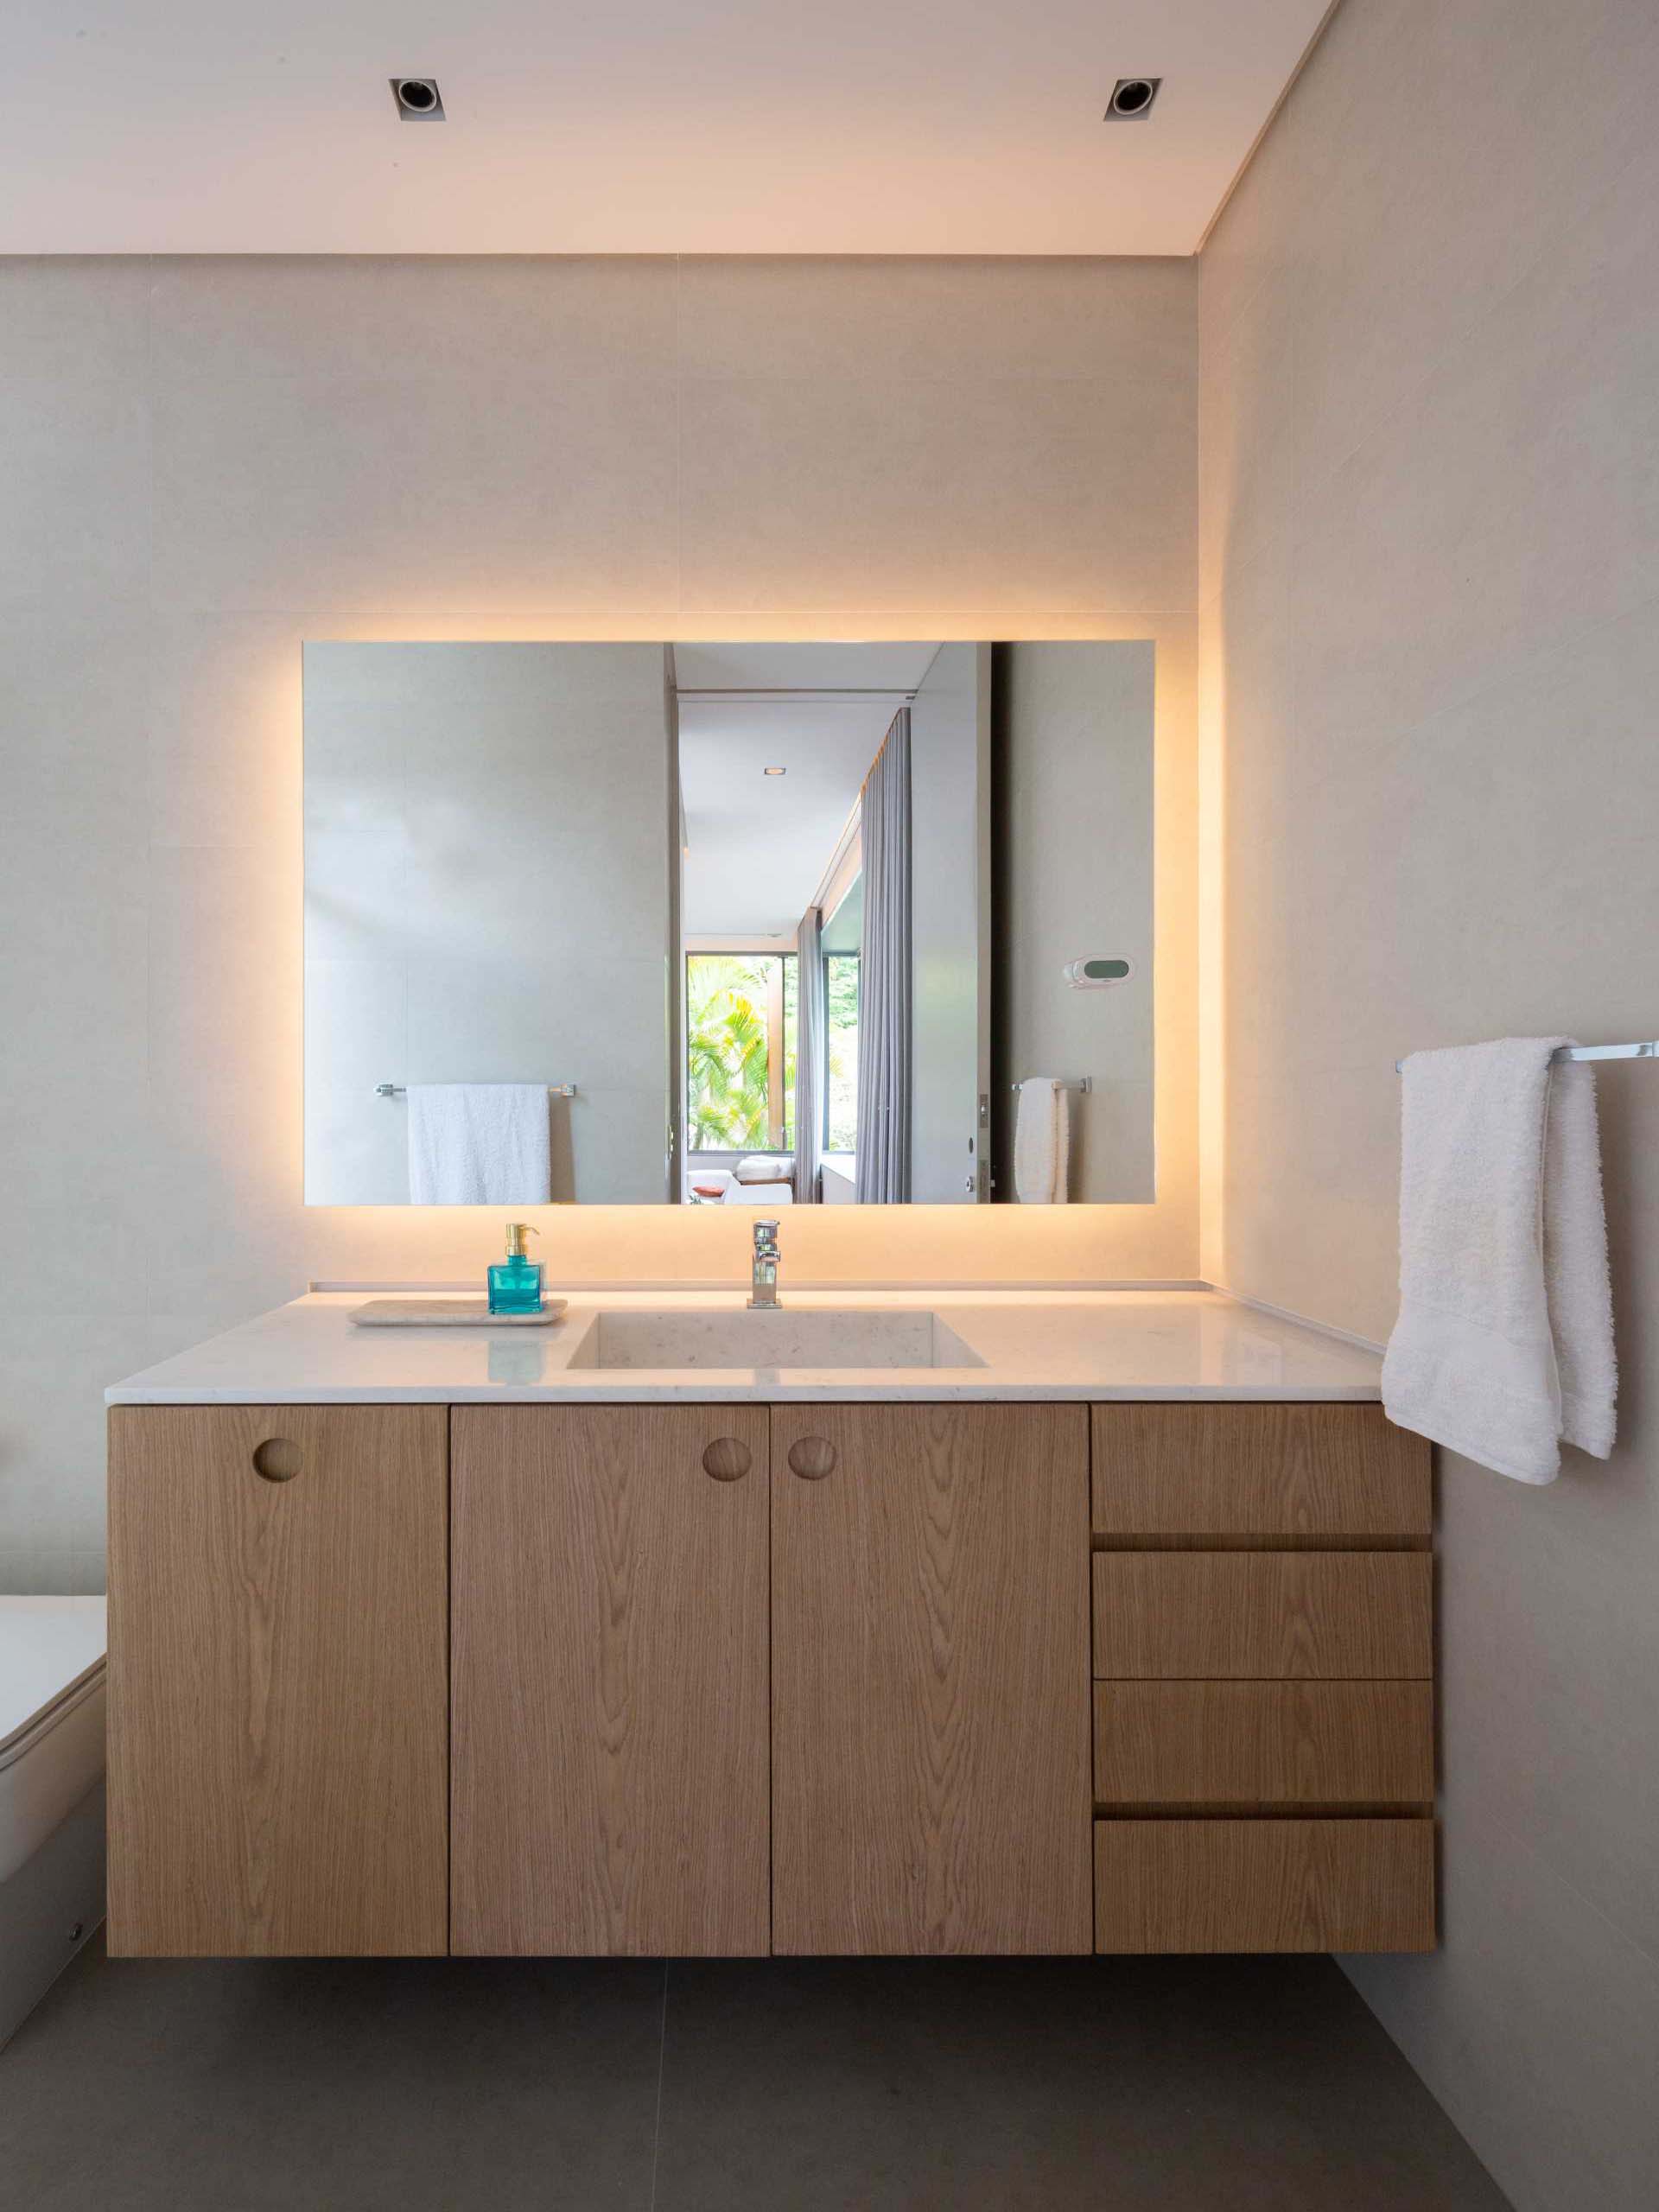 In this modern bathroom, there's a wood vanity with a backlit mirror above.